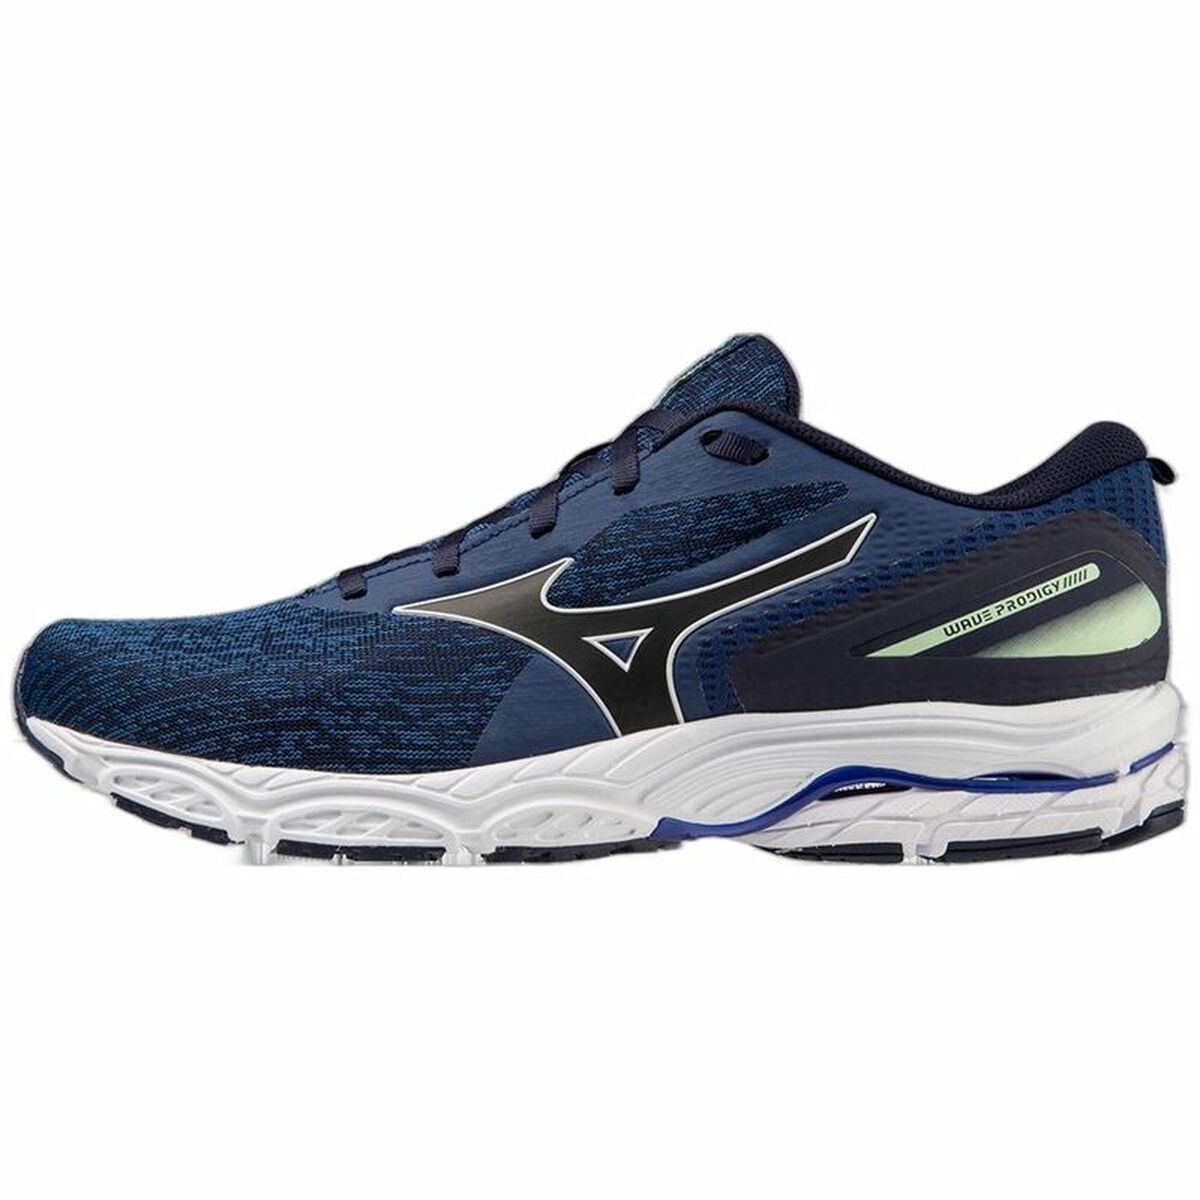 Running Shoes for Adults Mizuno Wave Prodigy 5 Blue Men